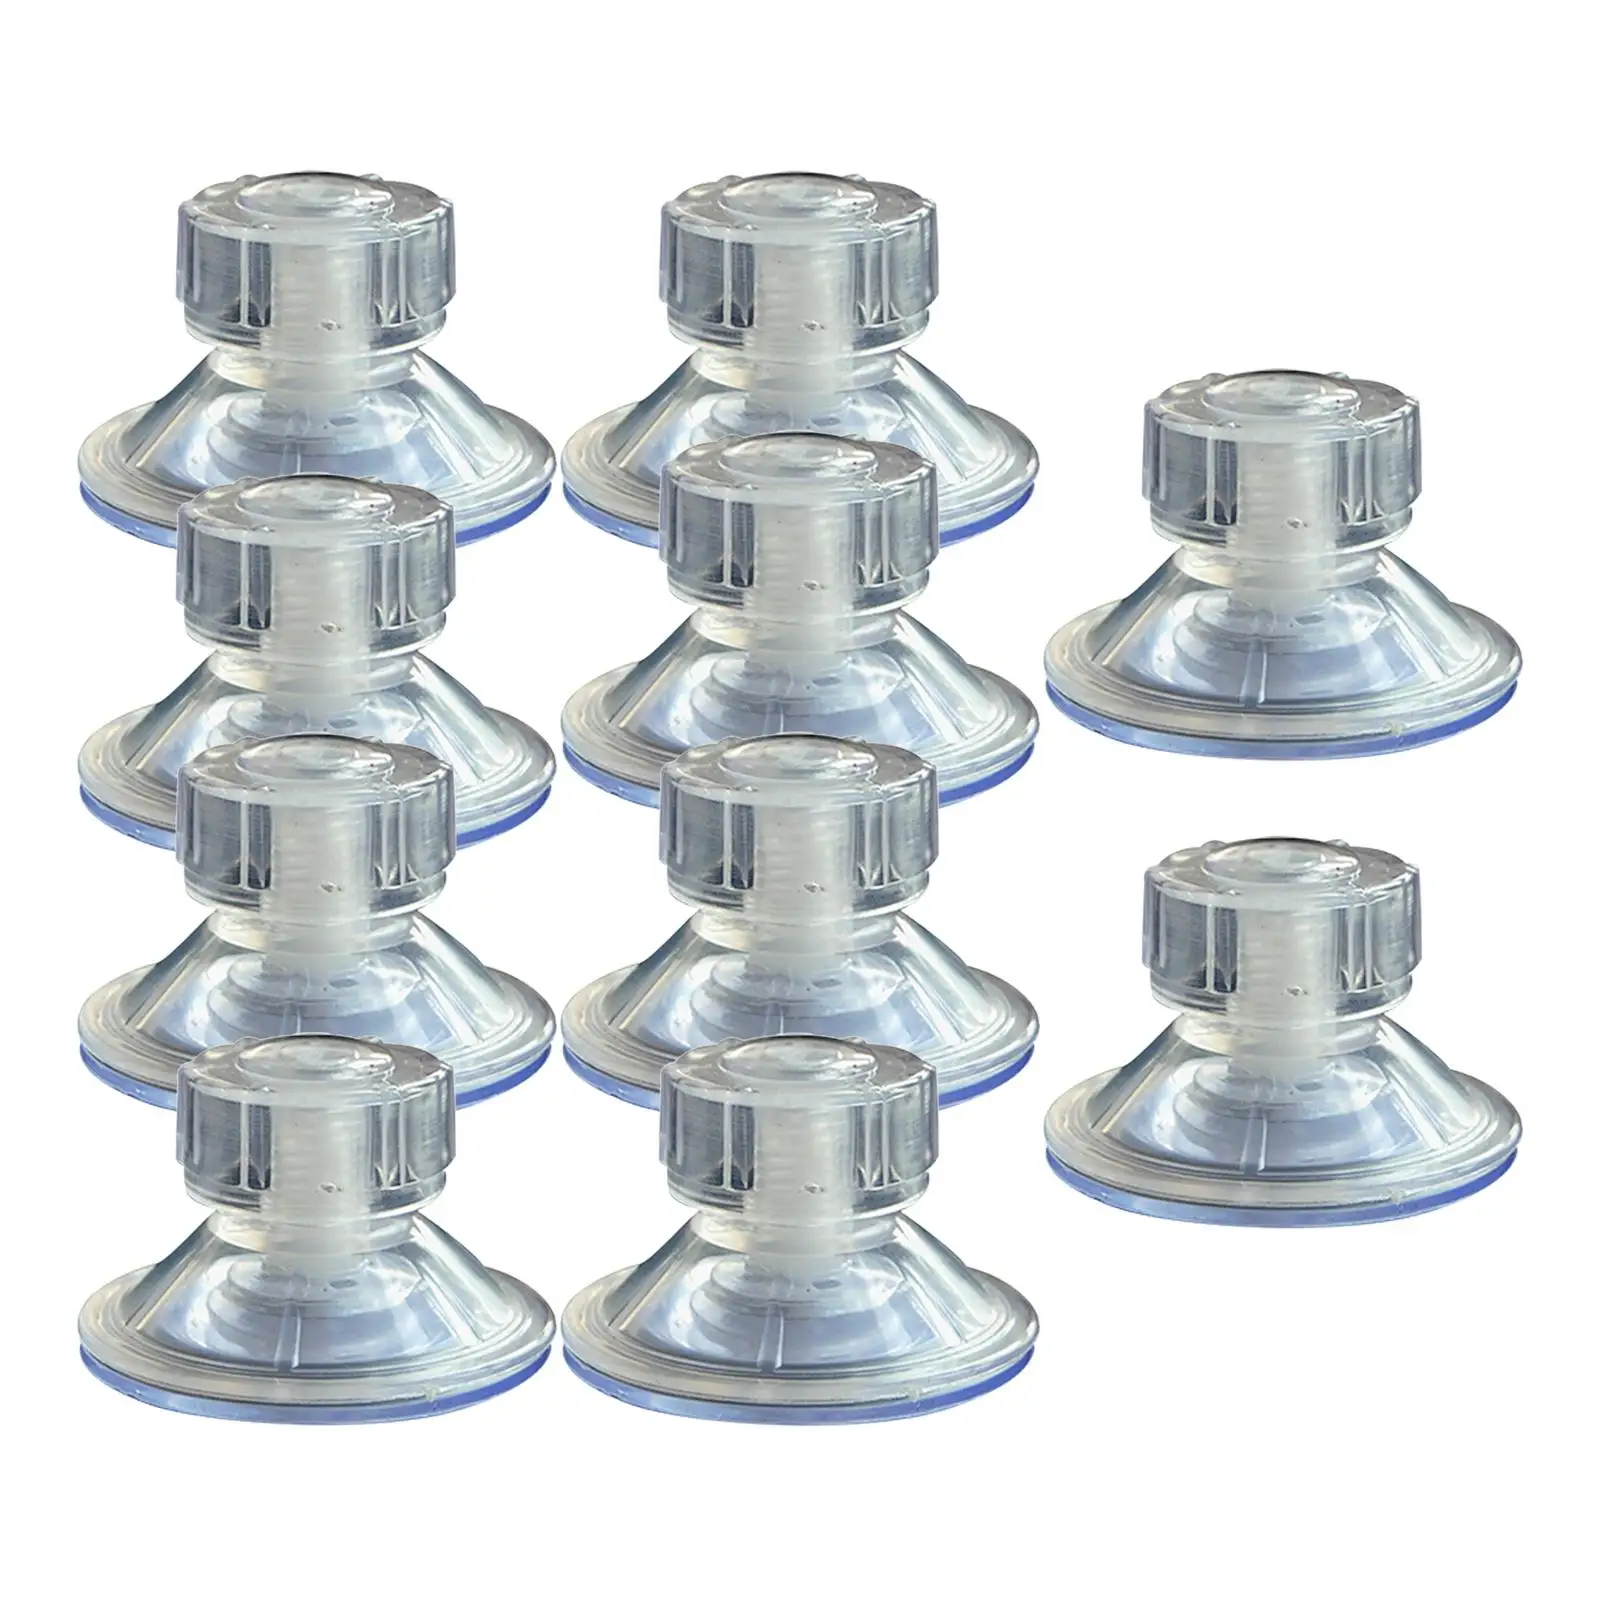 10 Pieces Car Awning Suction Cup Anchor Limpets Holder for  Motorhome